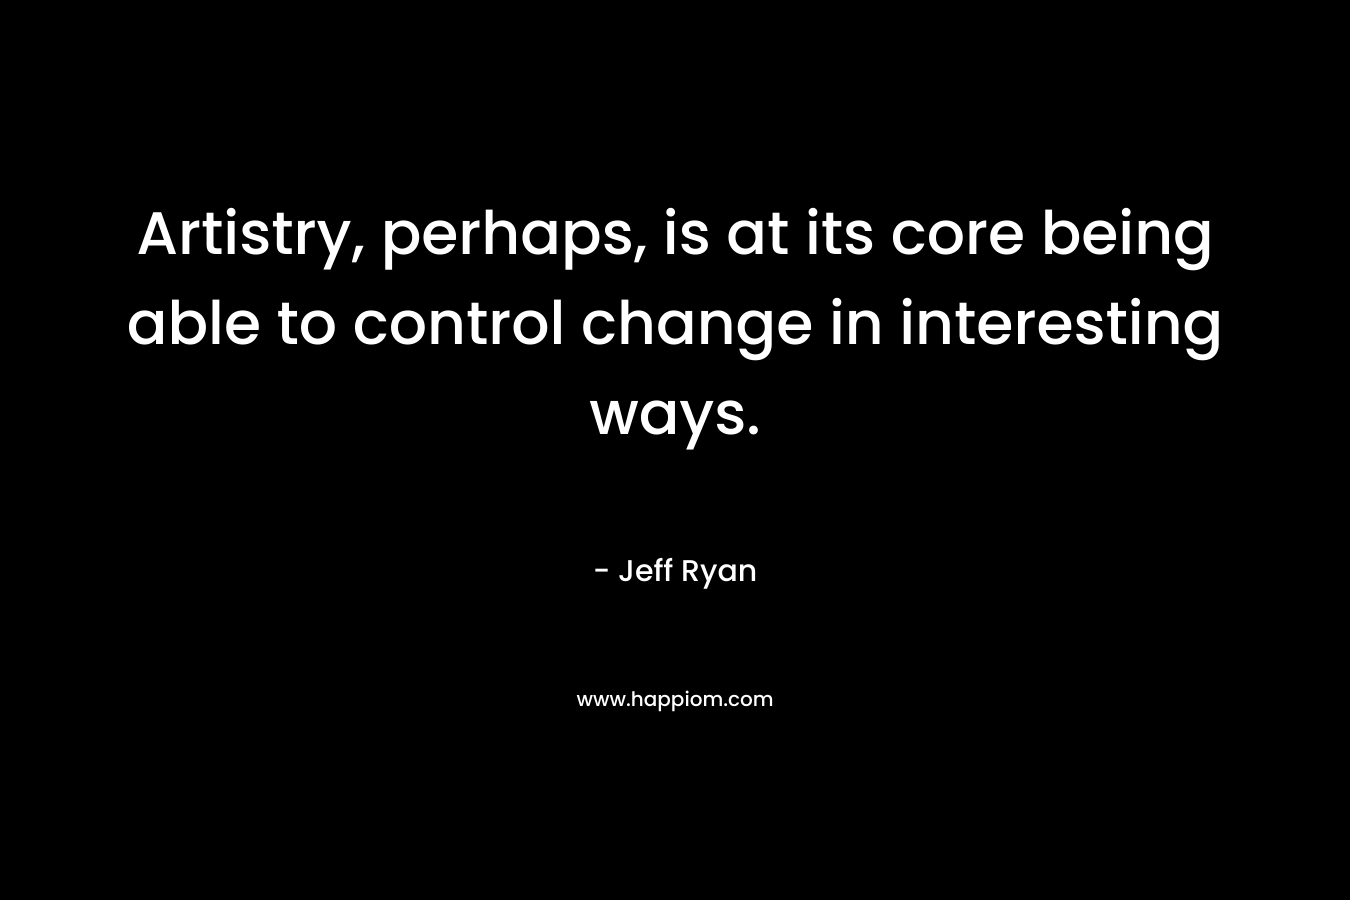 Artistry, perhaps, is at its core being able to control change in interesting ways. – Jeff Ryan